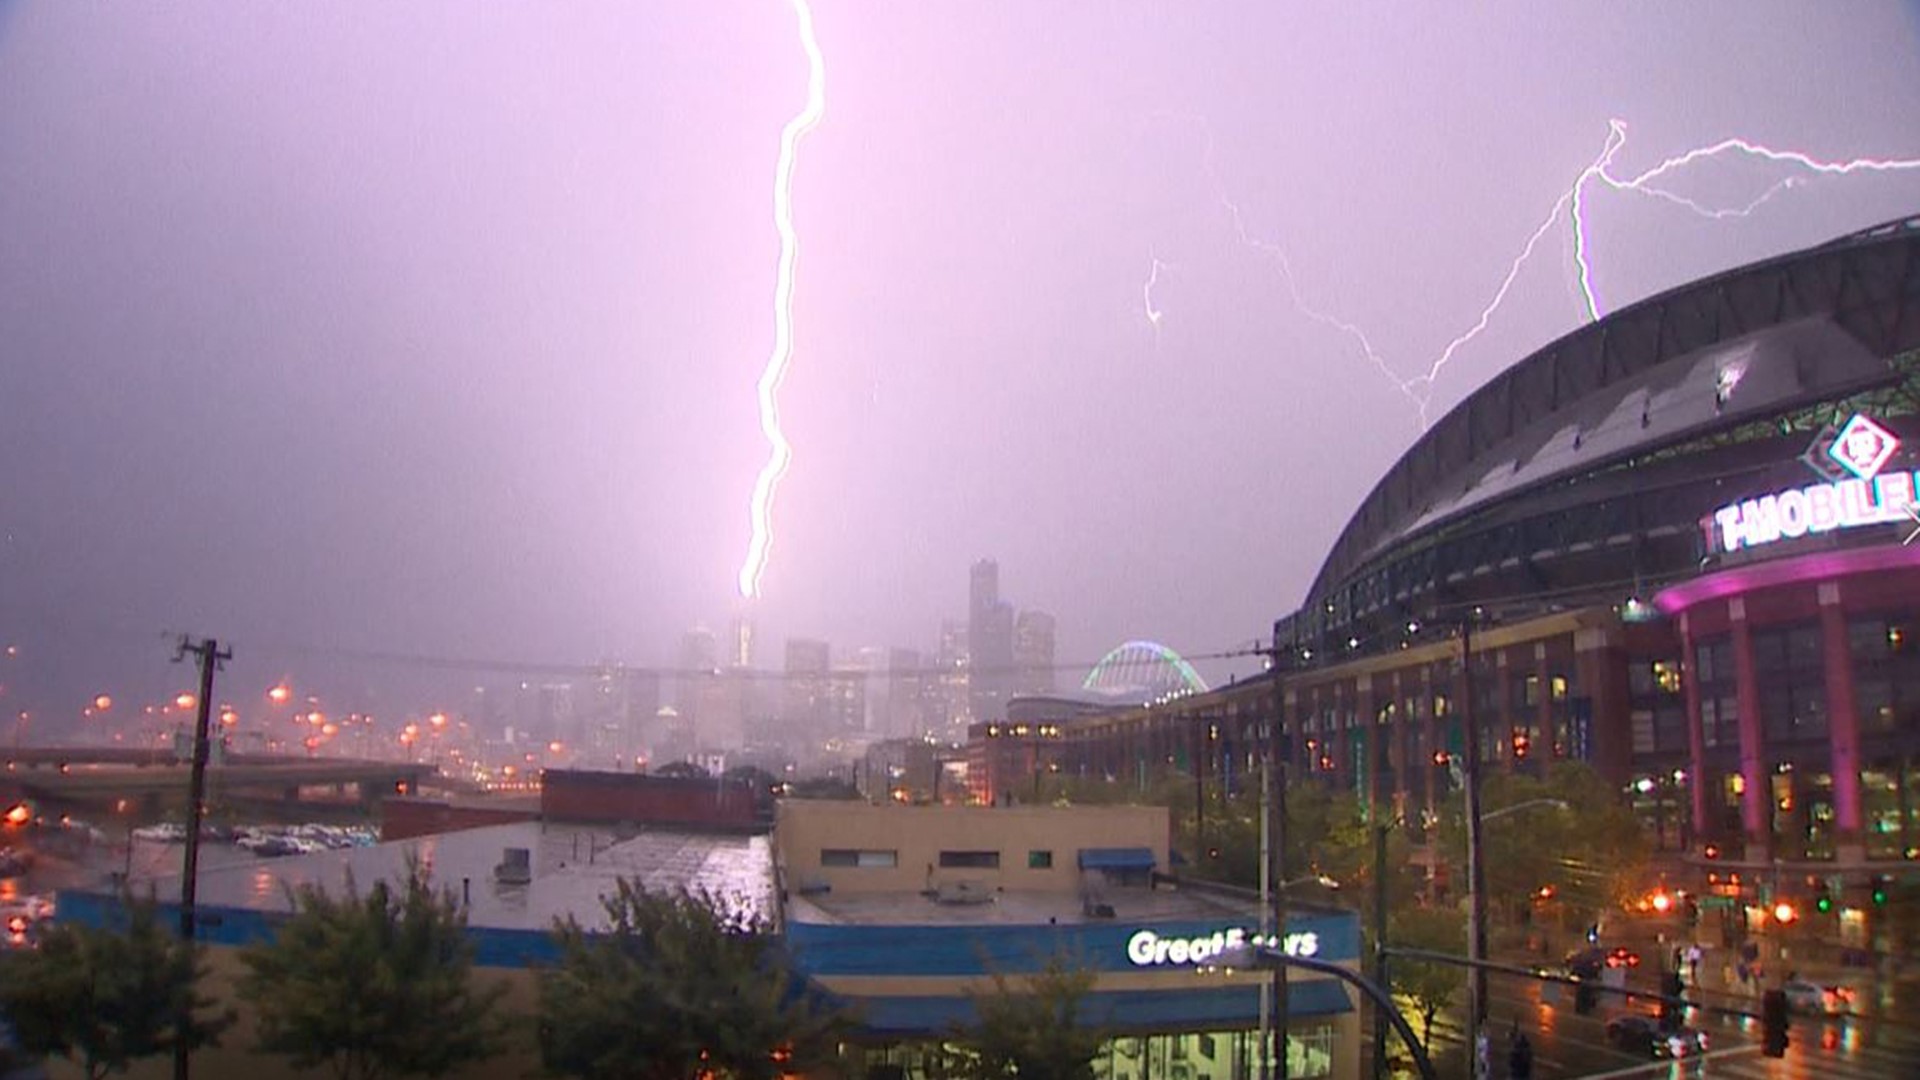 Video captured by KING 5 appears to show lightning striking the Rainier Square Tower in Seattle Thursday night. Video is slowed down to 10% and looped.